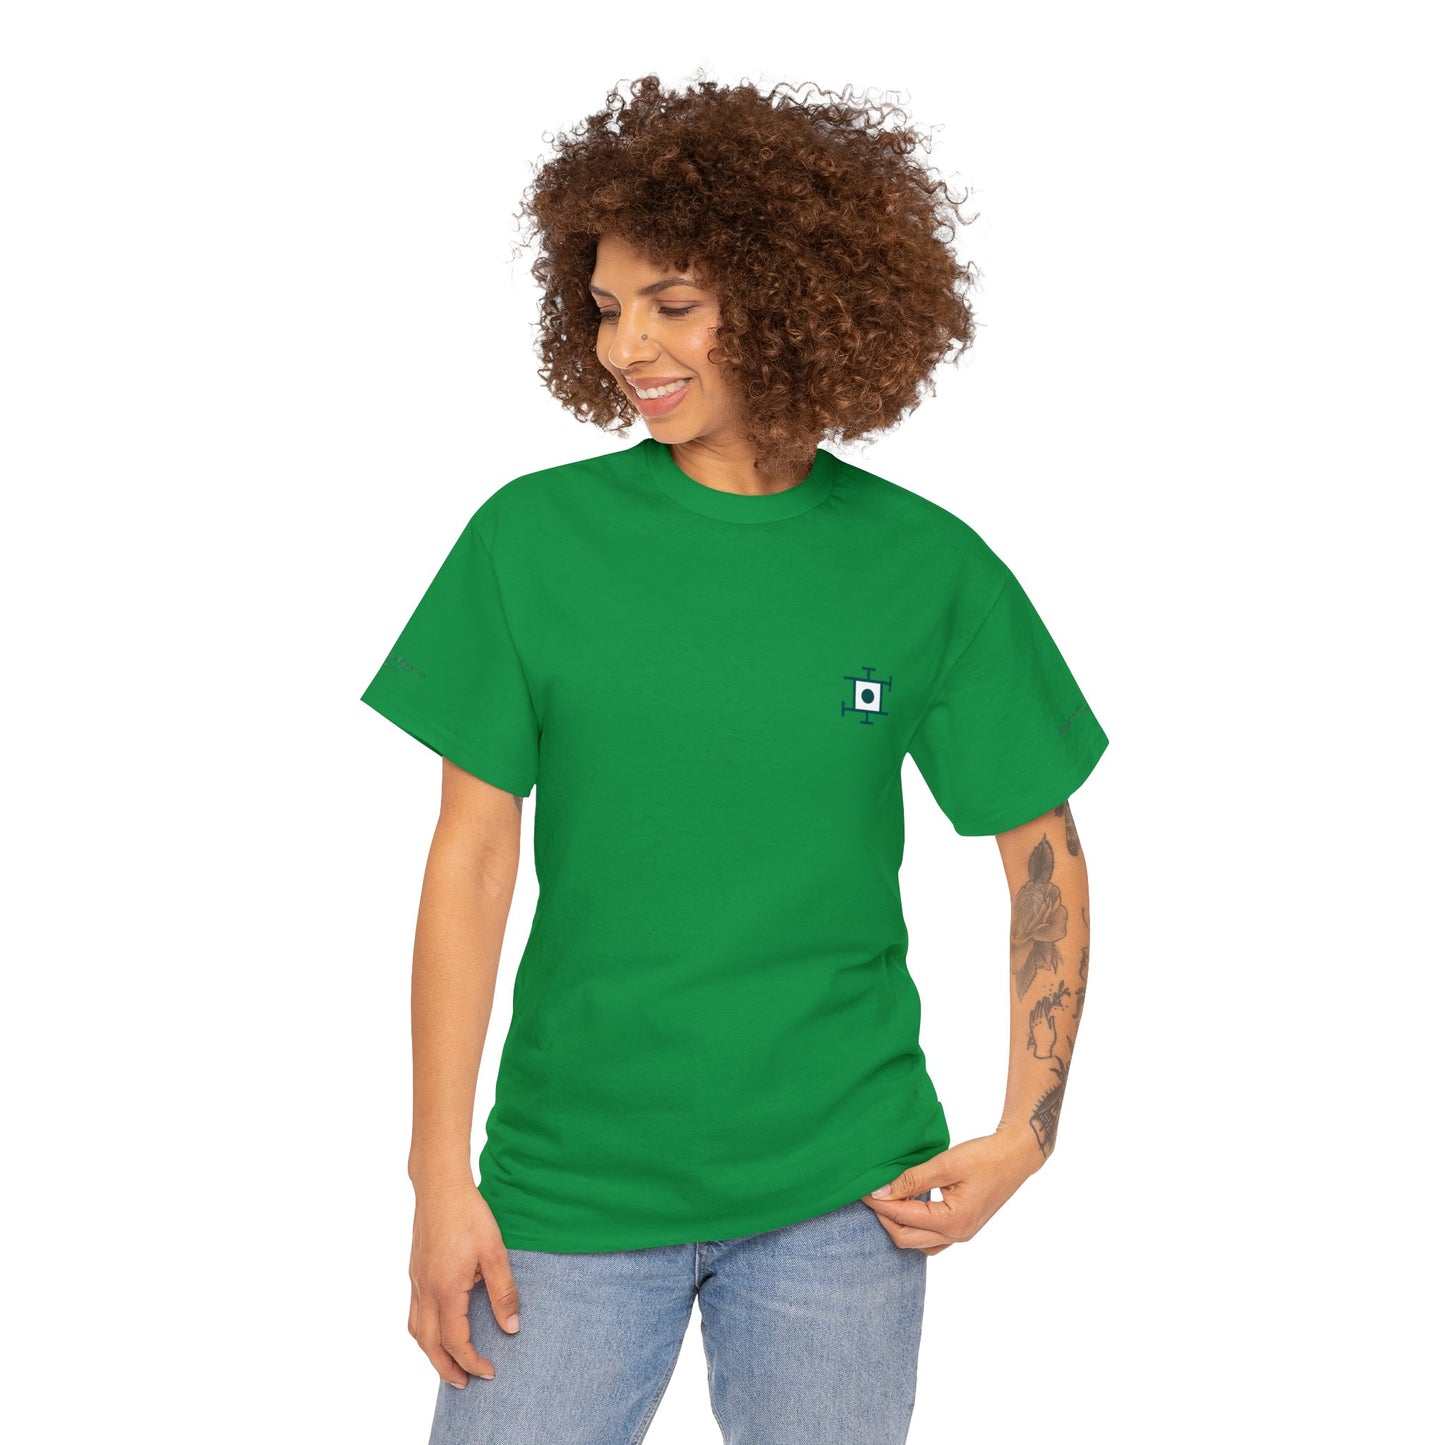 Simple BIS Cotton Tee